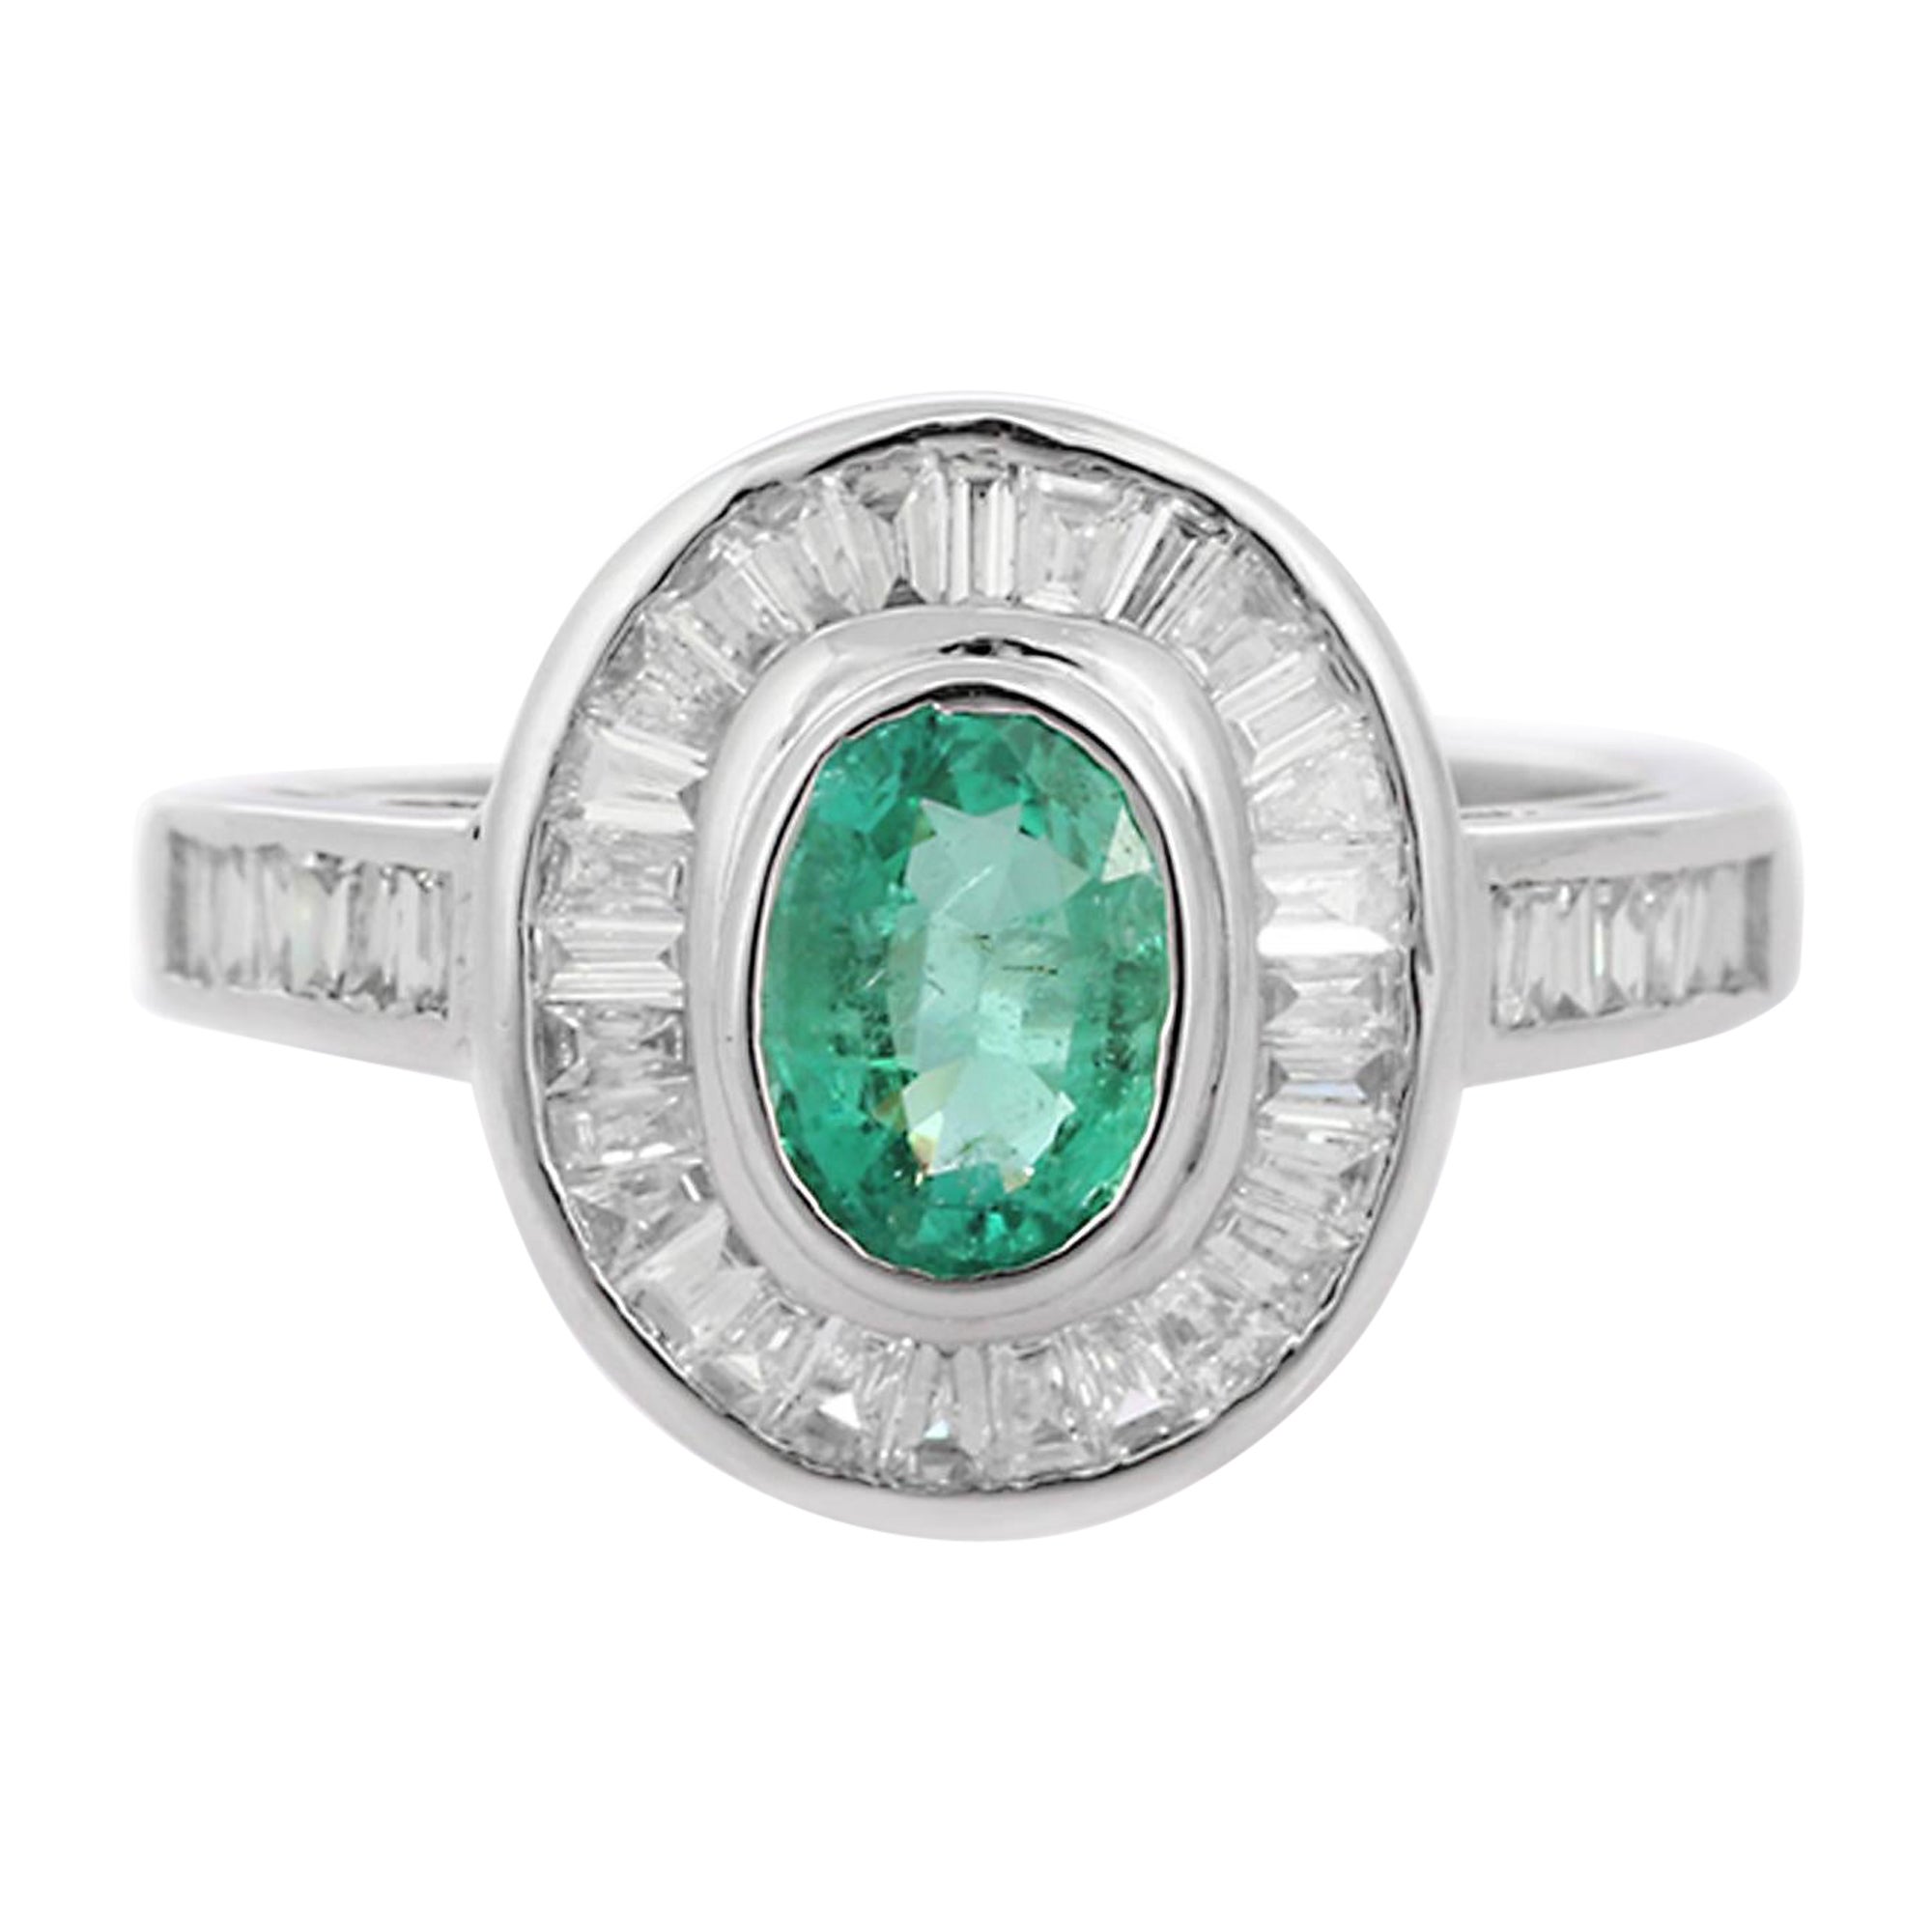 For Sale:  1.56 Carat Emerald Cocktail Ring with Halo of Diamonds in 18K White Gold